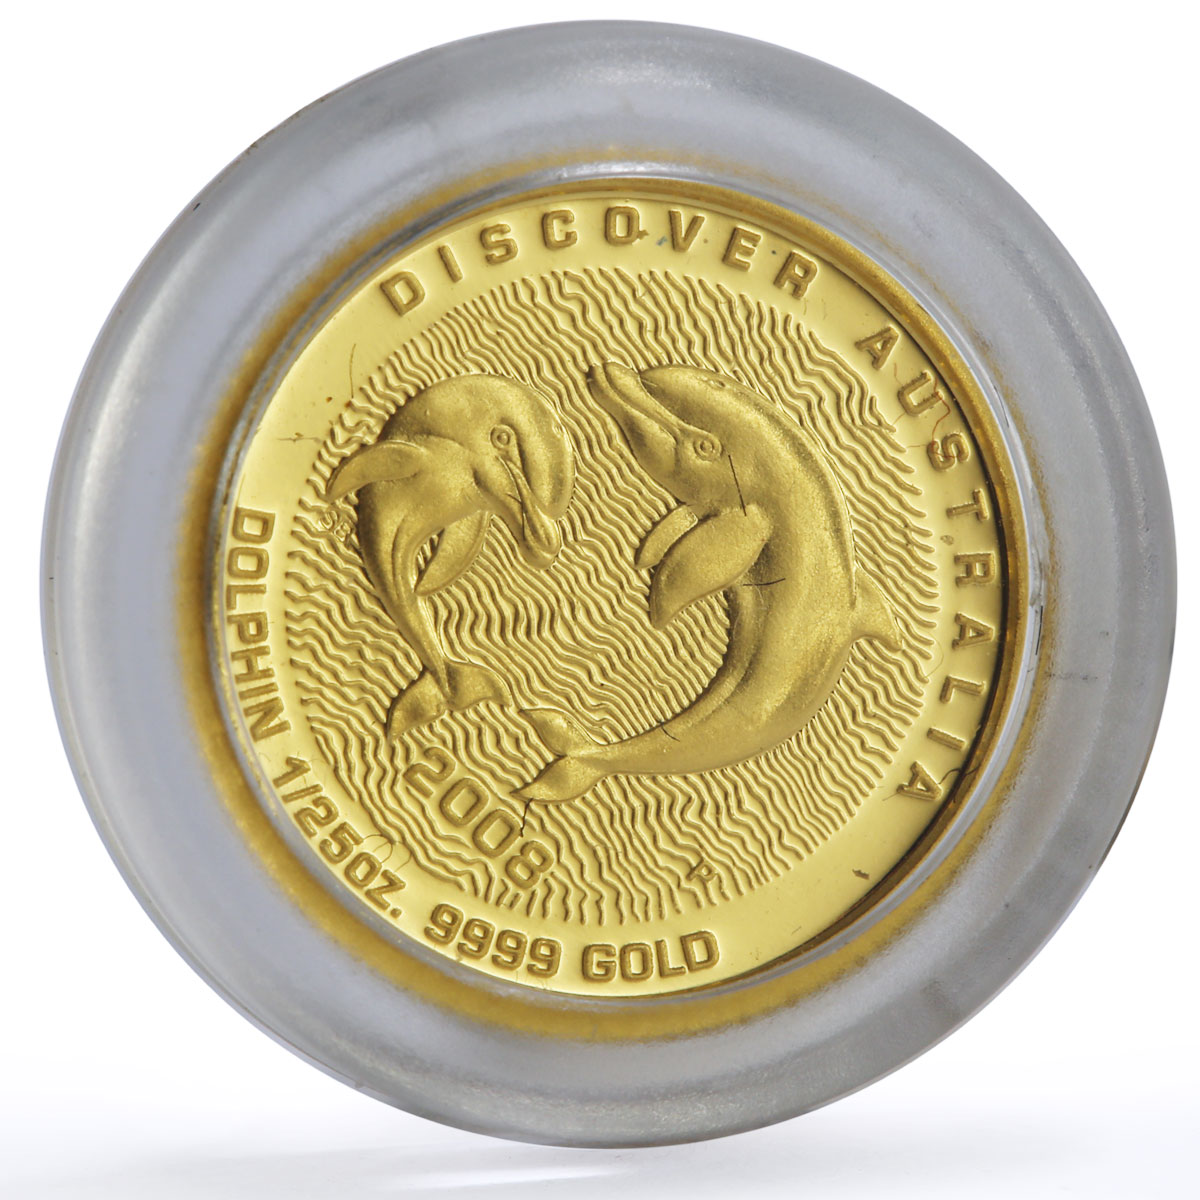 Australia 5 dollars Discovers Dolphin Animals Fauna proof gold coin 2008